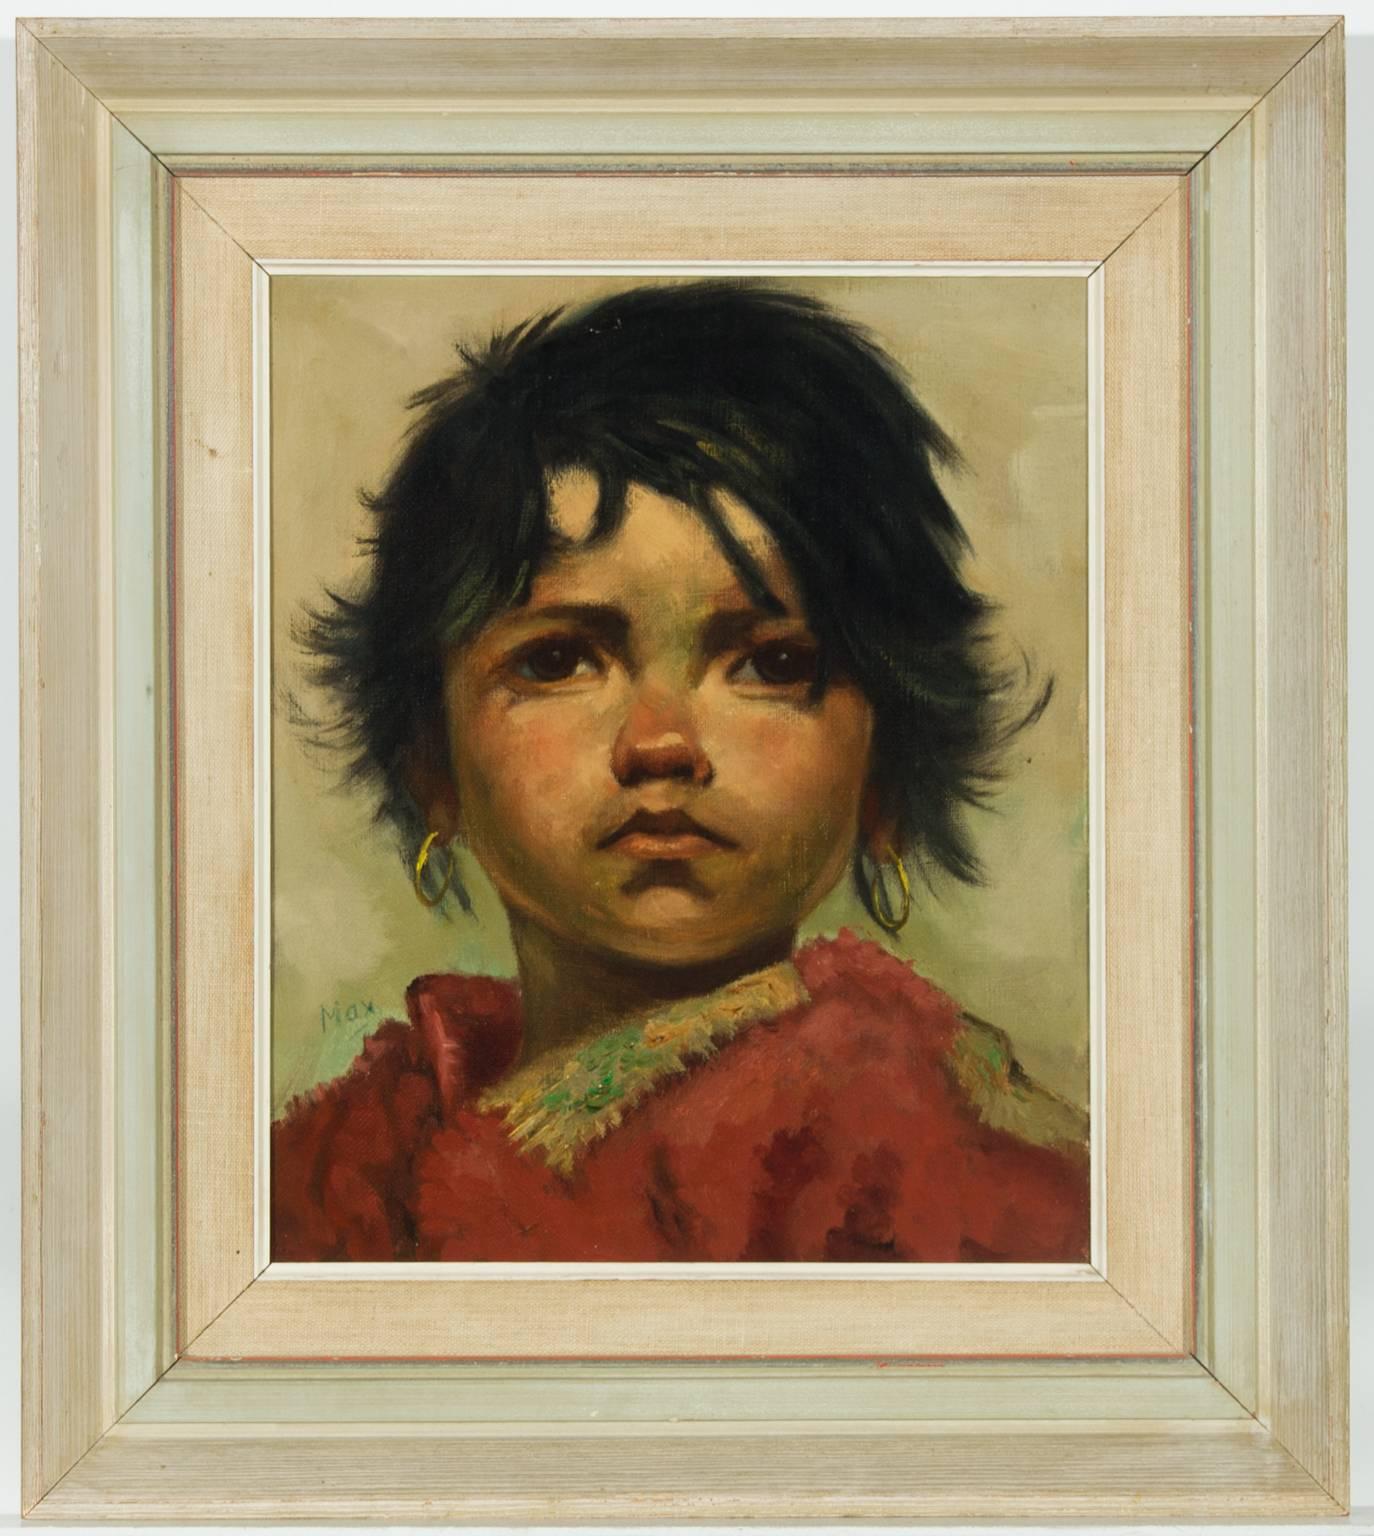 A pair of 20th century expressive modernist portraits of children by the well listed Belgian artist Jeanne Brandsma. The artist has beautifully captured the expression and character of the sitters. Both paintings are presented in modern pale wooden